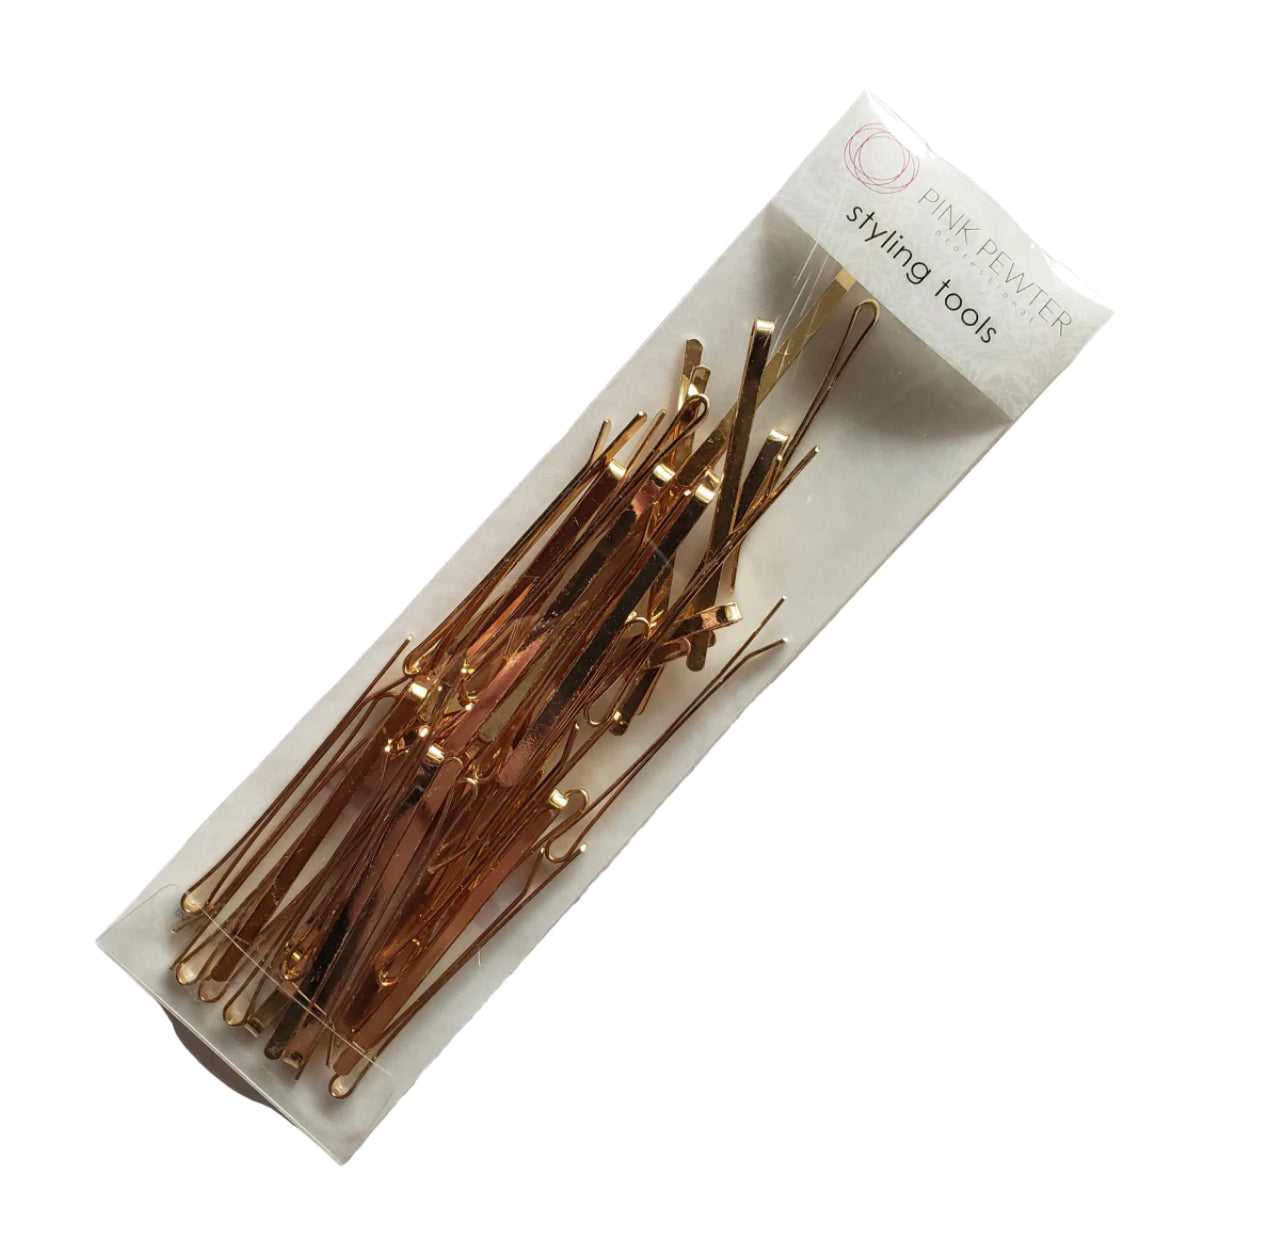 Pink Pewter Professional Flat Metal Styling Bobby Pins in Storage Case - 40pc Pack Gold